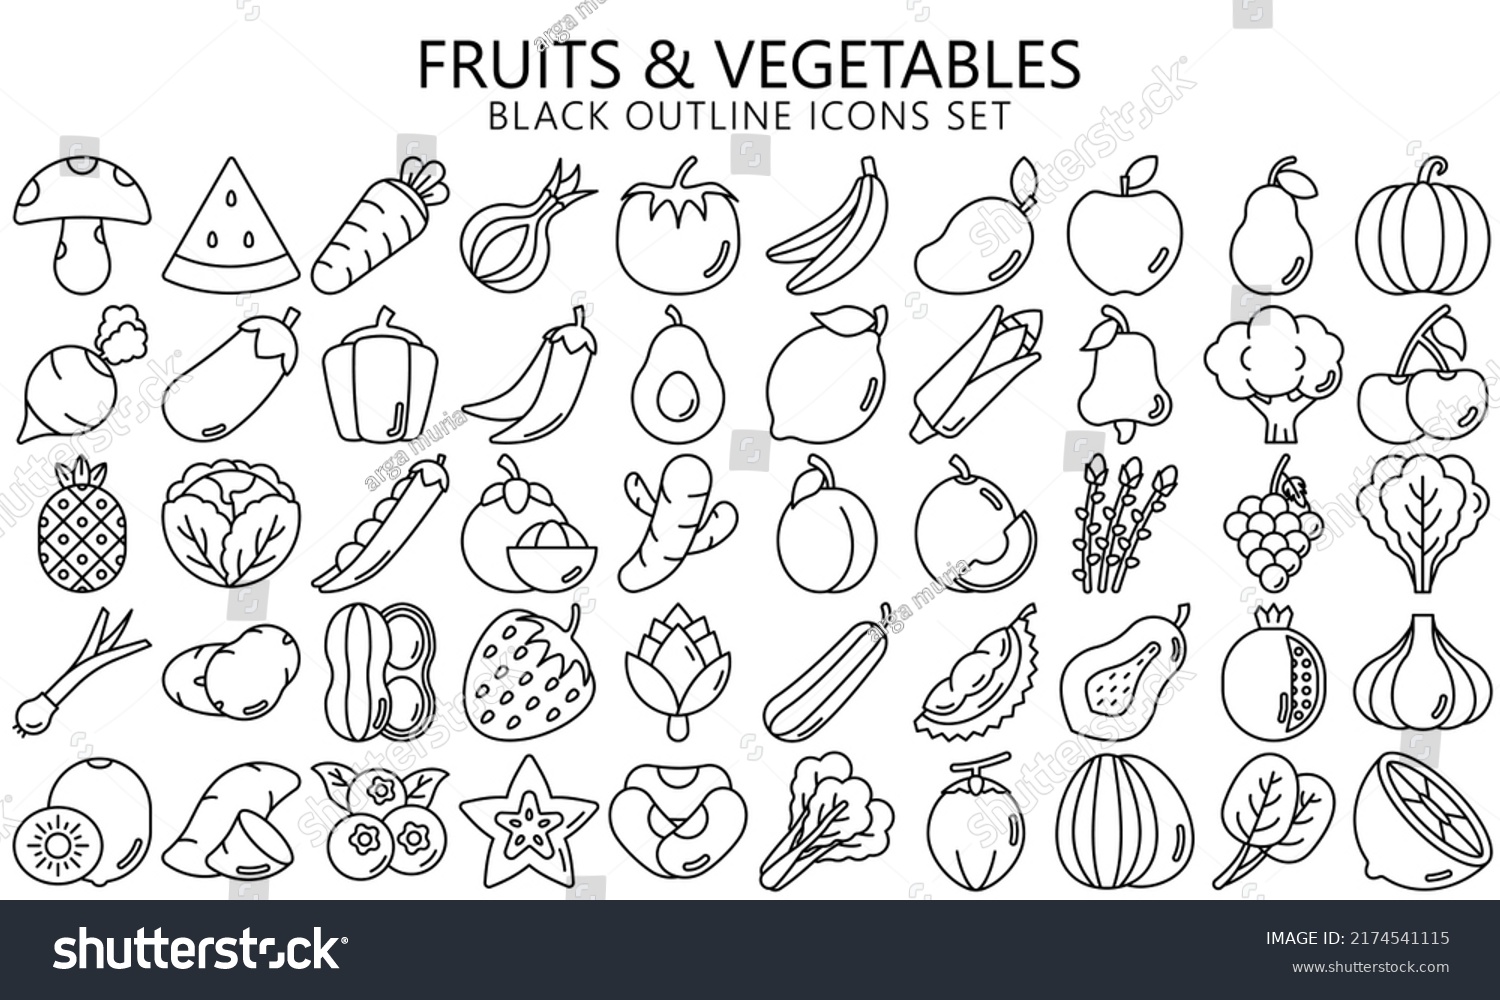 SVG of Set of flat fruits and vegetables icons, Contains such broccoli, peas, carrot, lime, melon and more. Used for modern concepts, web, UI, UX kit and applications. vector EPS 10 ready to convert to SVG. svg